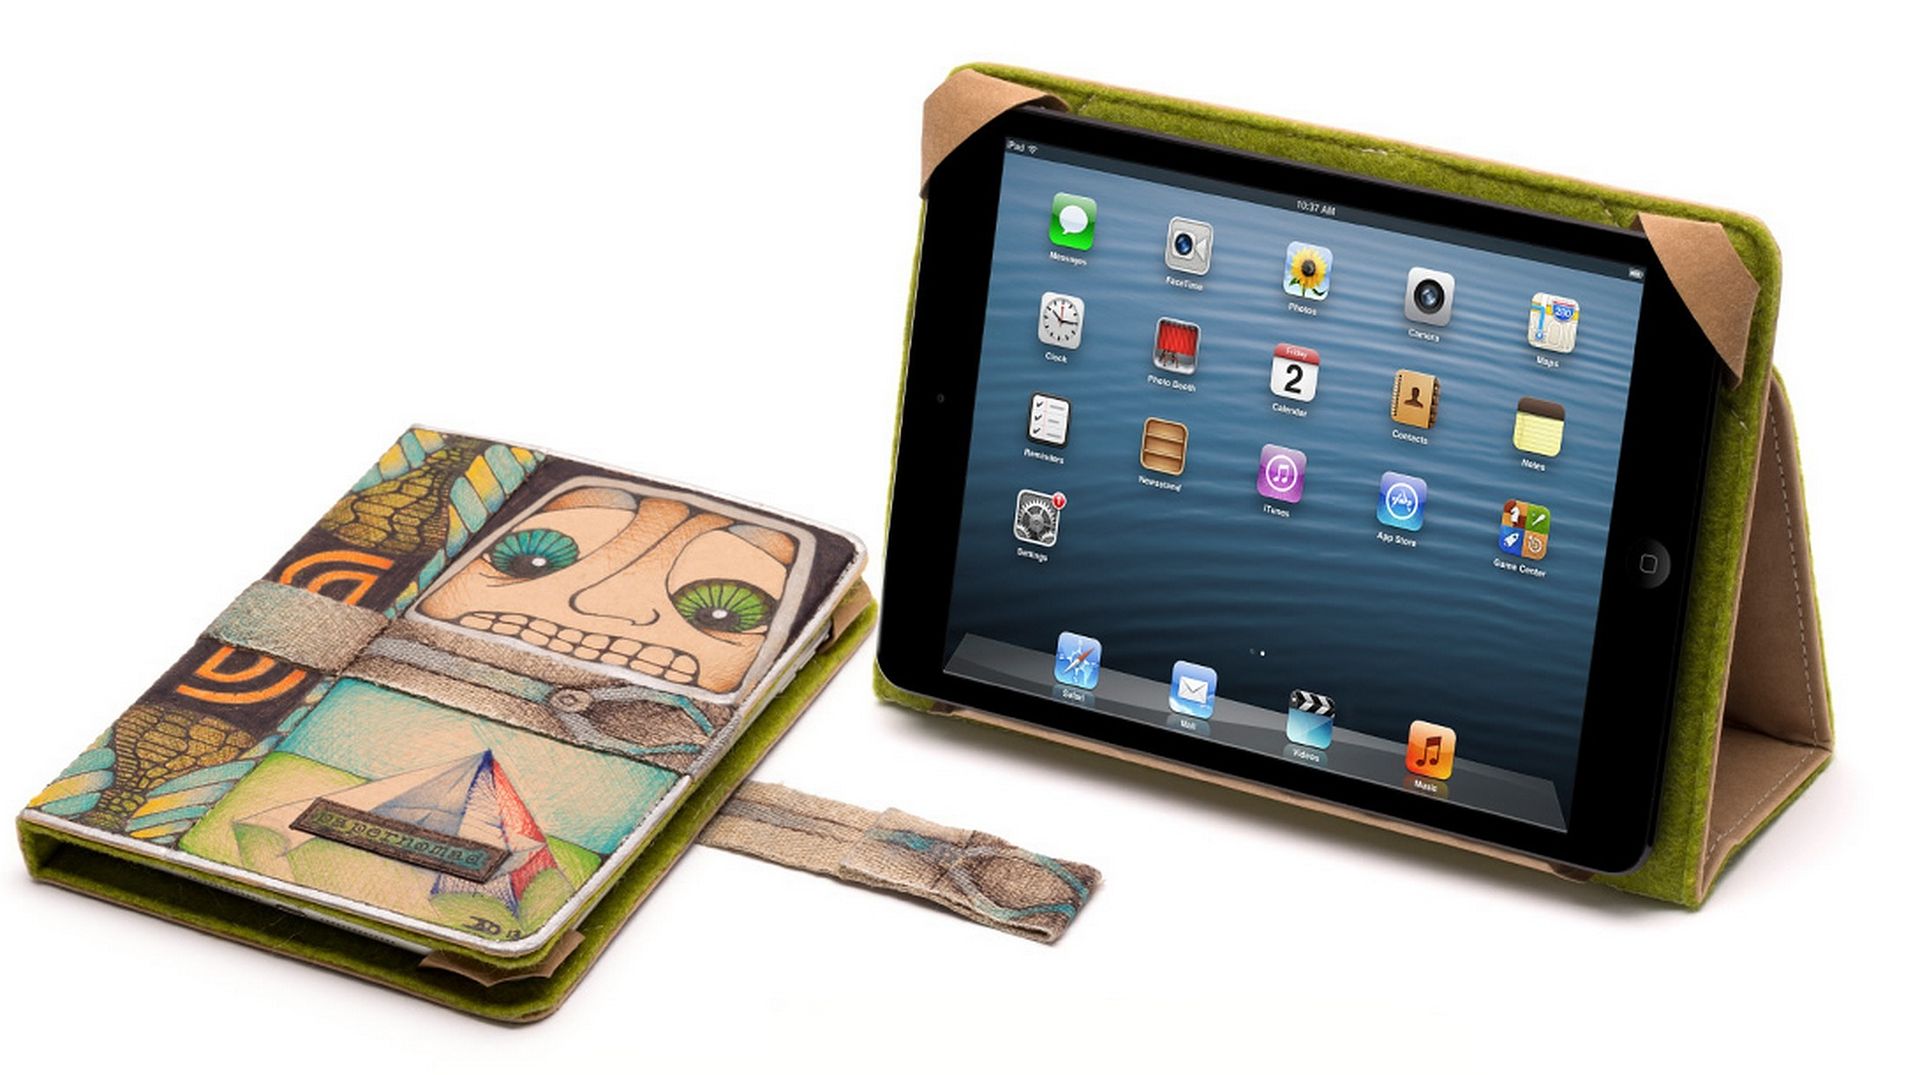 Papernomad iPad Folio now out: Waterproof, sustainable, and ready for your creative talents